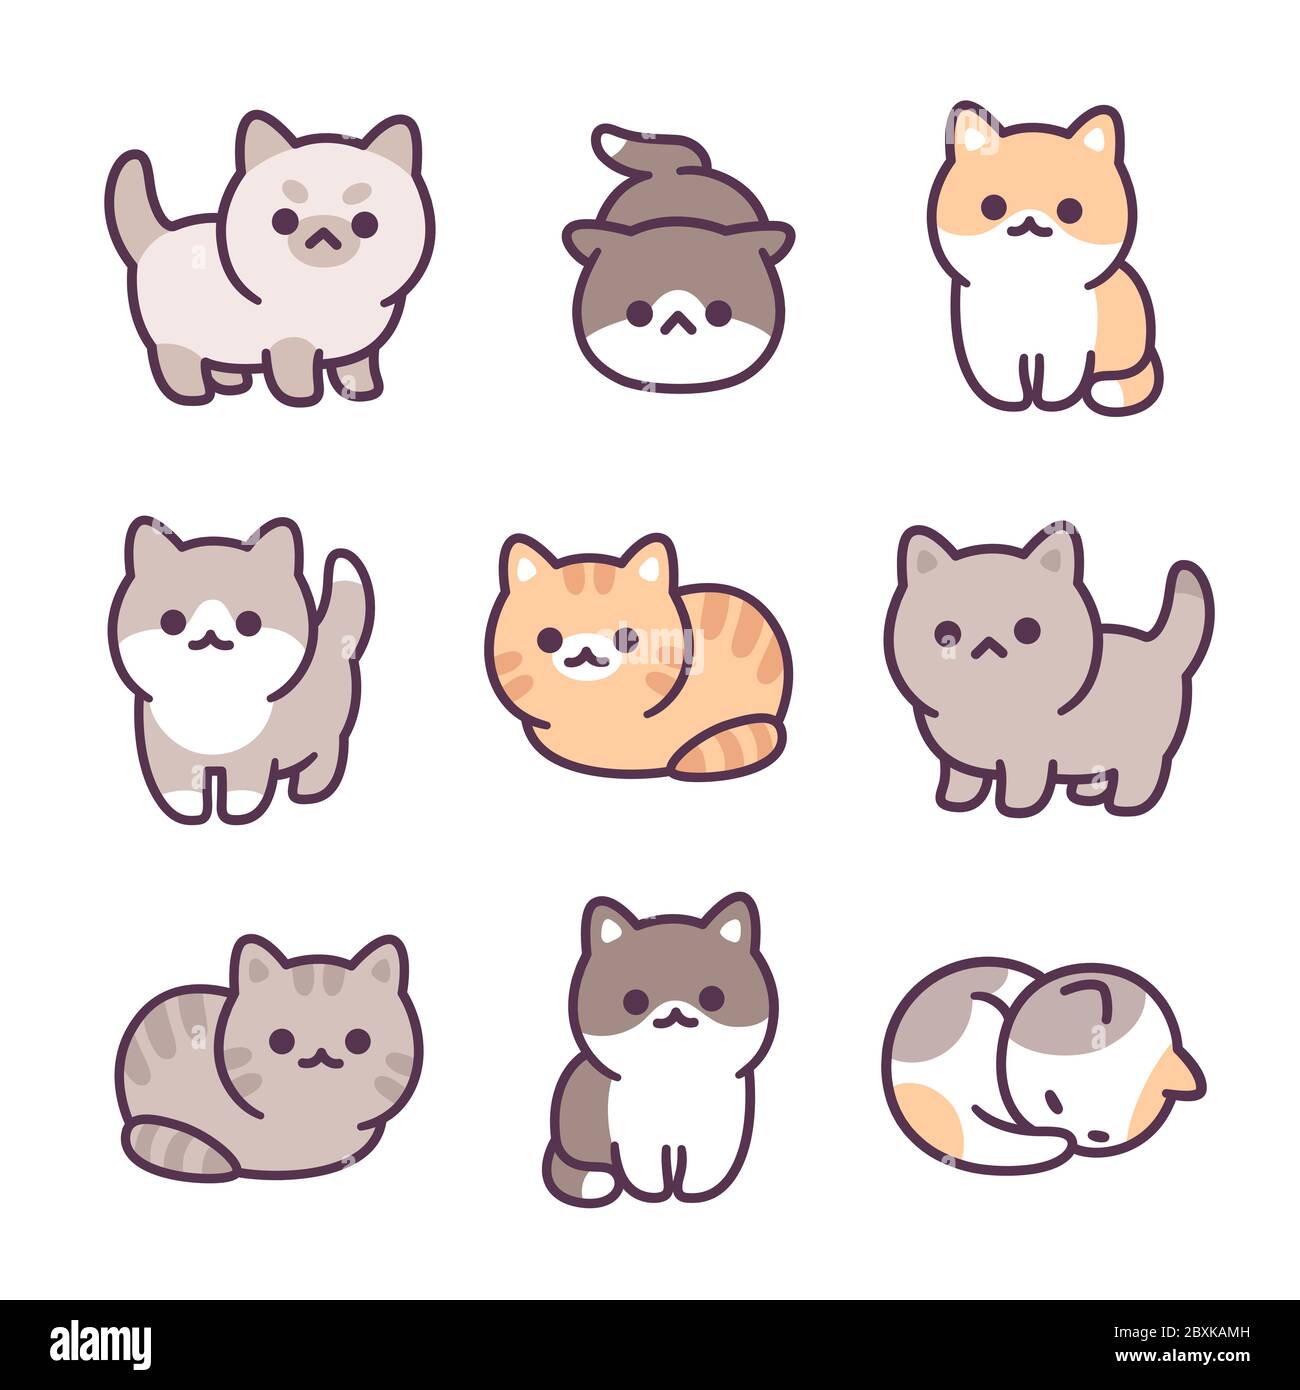 Tiny baby kittens hand drawn illustration set. Adorable little cats, different breeds and poses. Simple kawaii doodle style. Stock Vector